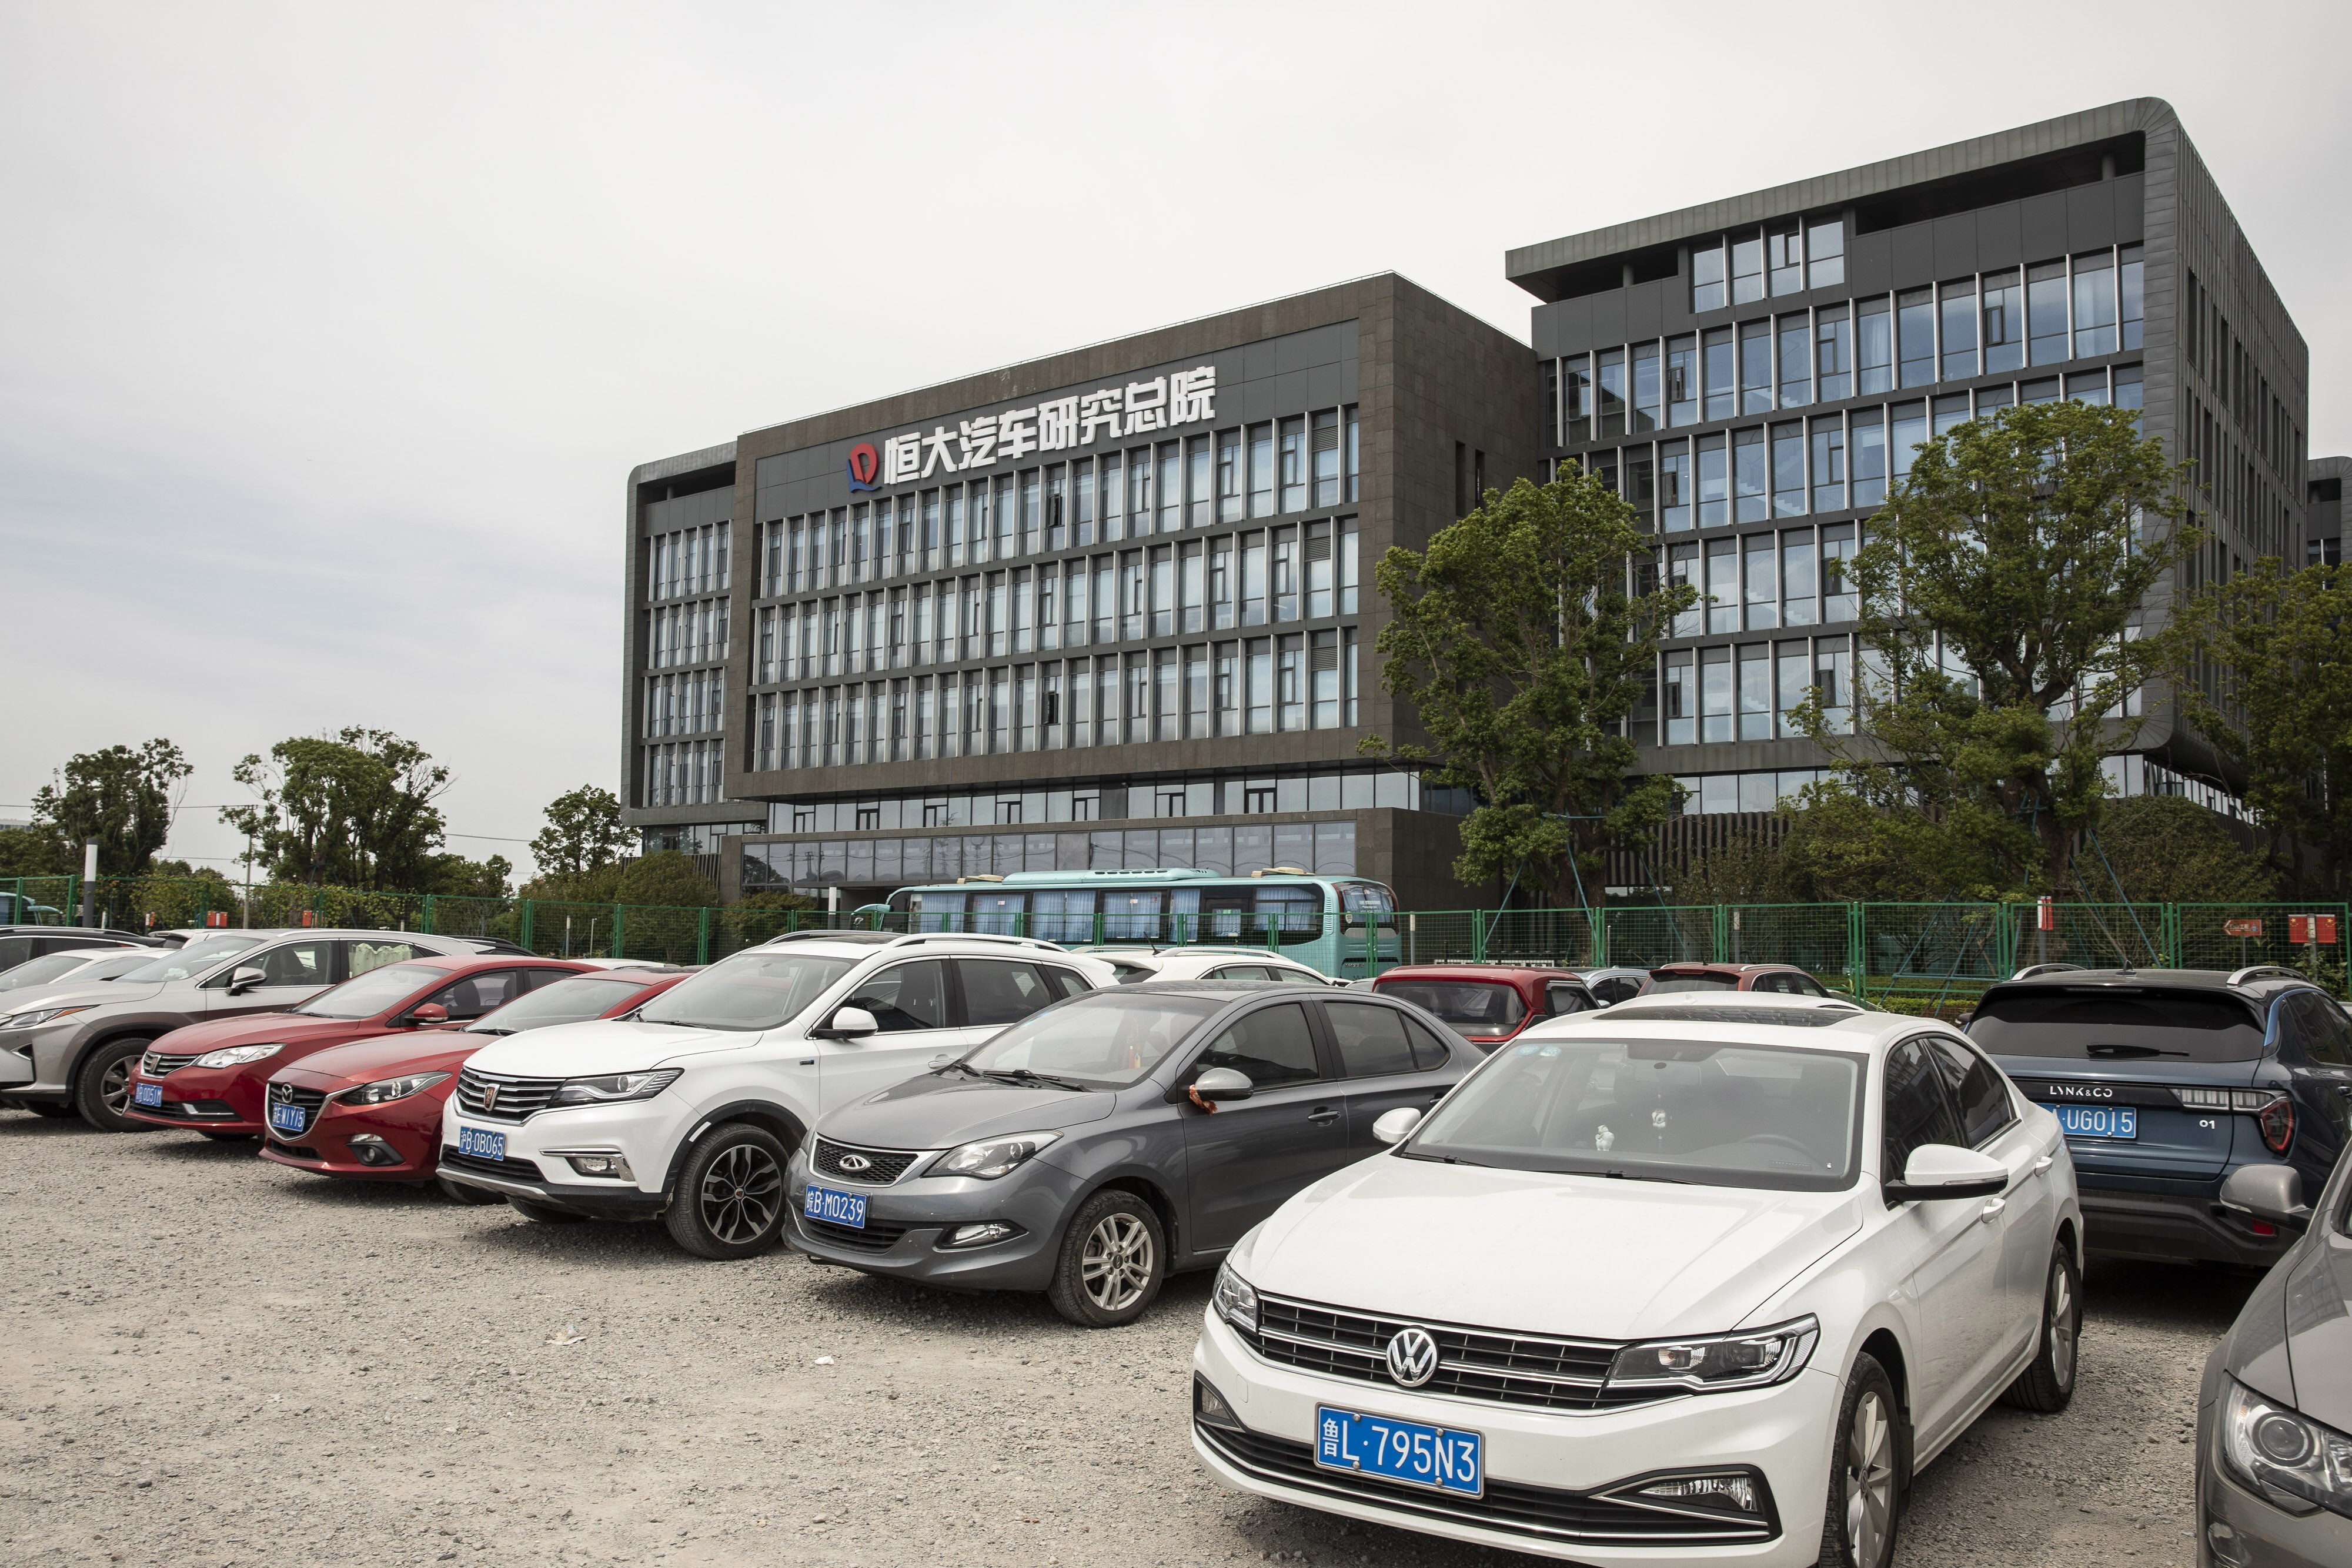 The China Evergrande New Energy Vehicle Group Ltd. research headquarters in Shanghai, China, on September 24, 2021. Photo: Bloomberg